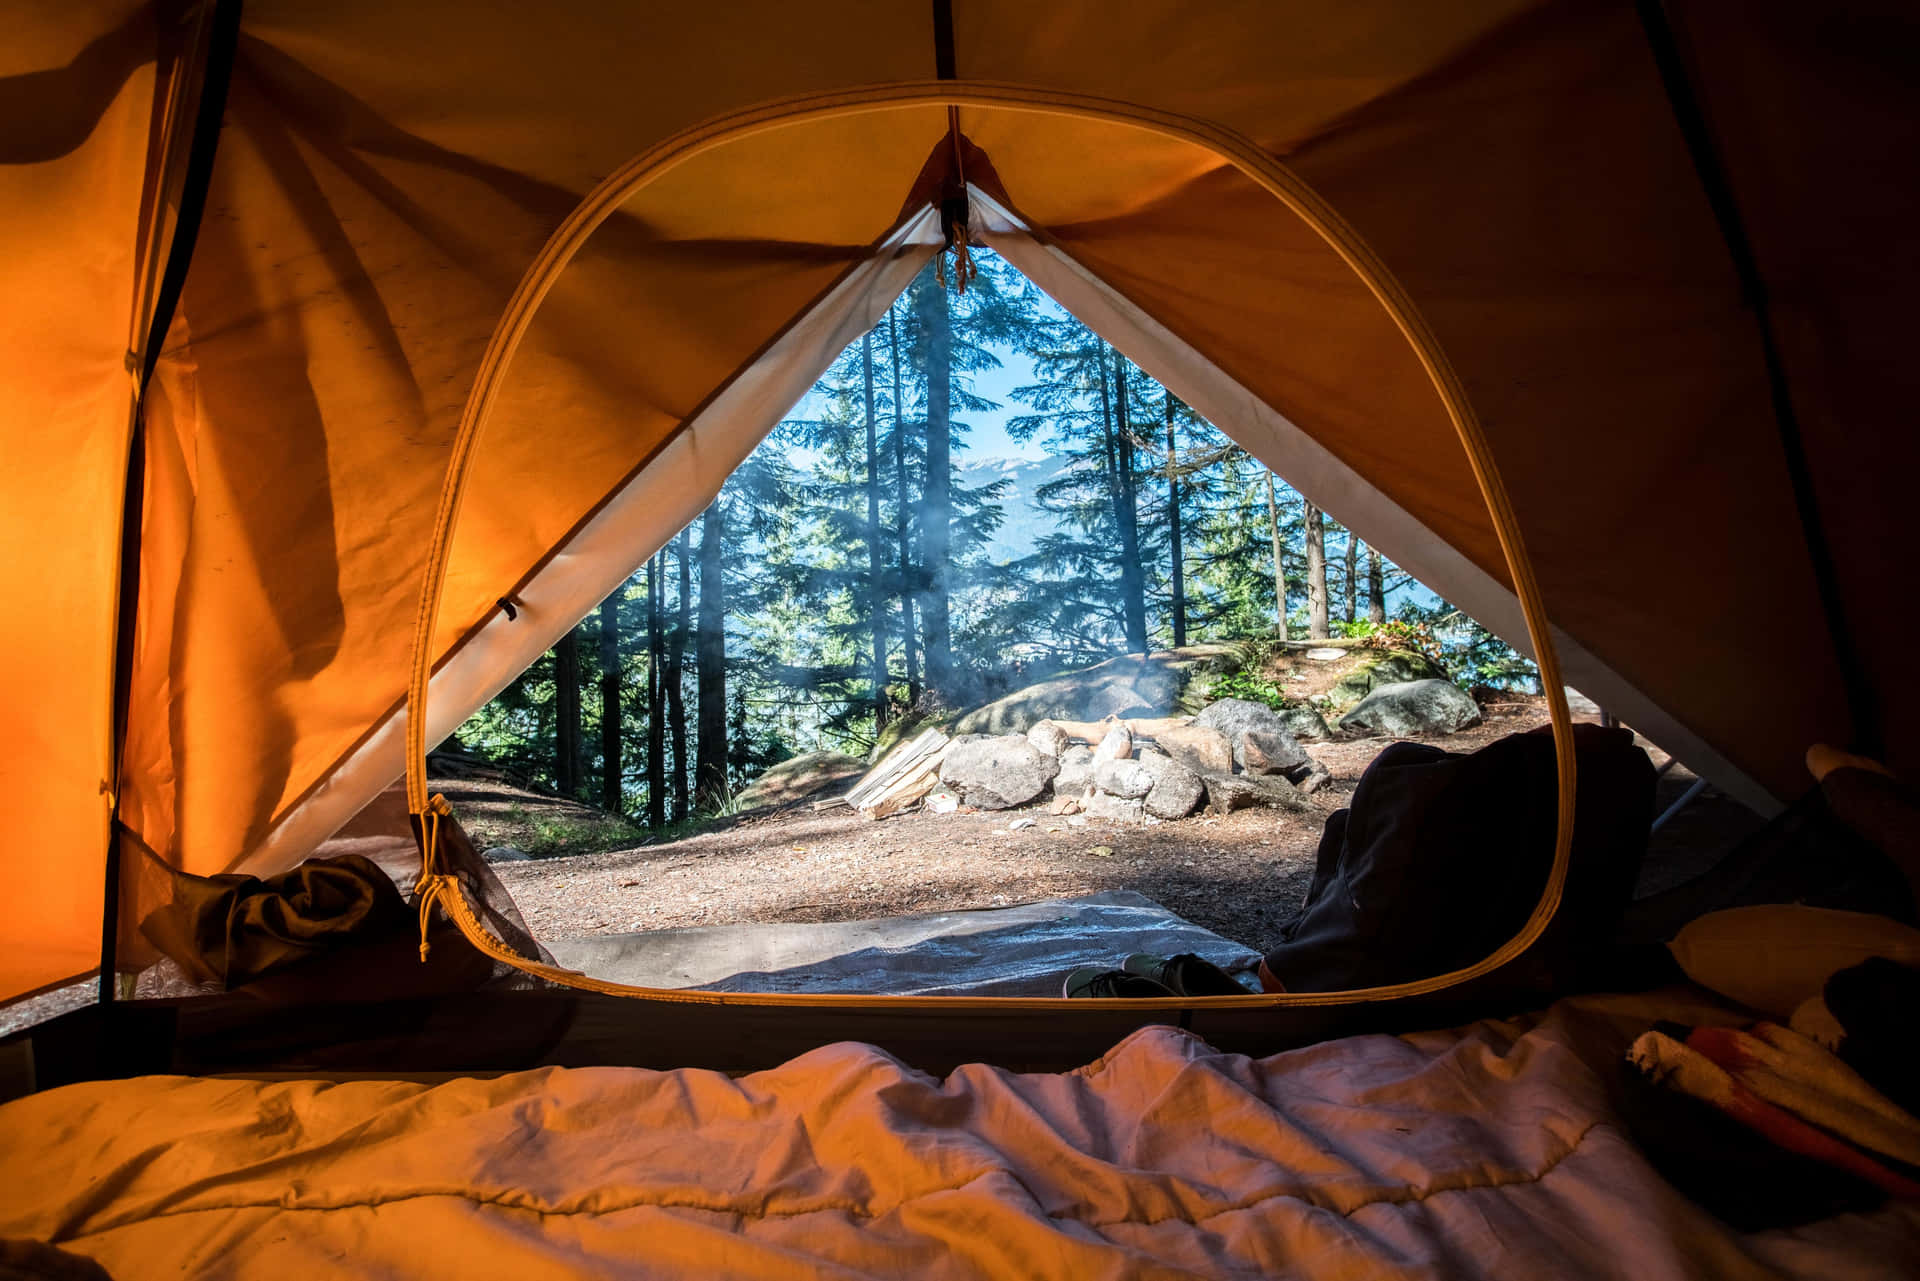 Enjoy nature and the great outdoors with a camping getaway